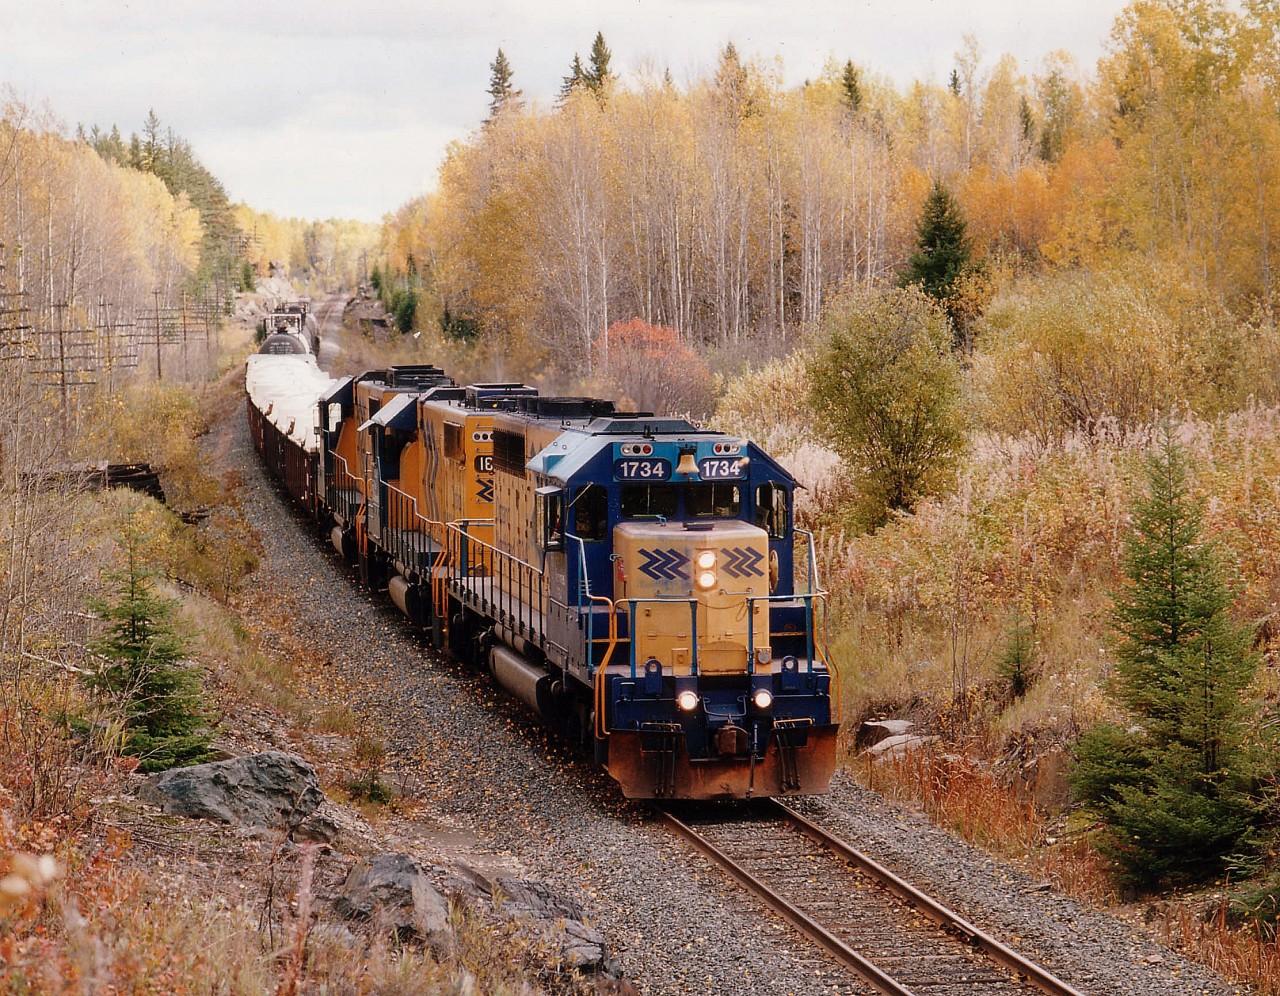 Its a nice bright late fall day as a northbound, having just left Englehart, with ONR 1734, 1806 and 1808 is about to duck under Hwy 112 on its way to Swastika and the junction taking this short train thru Kirkland Lake onward to Rouyn-Noranda. All three units are still in active service as of 2013.